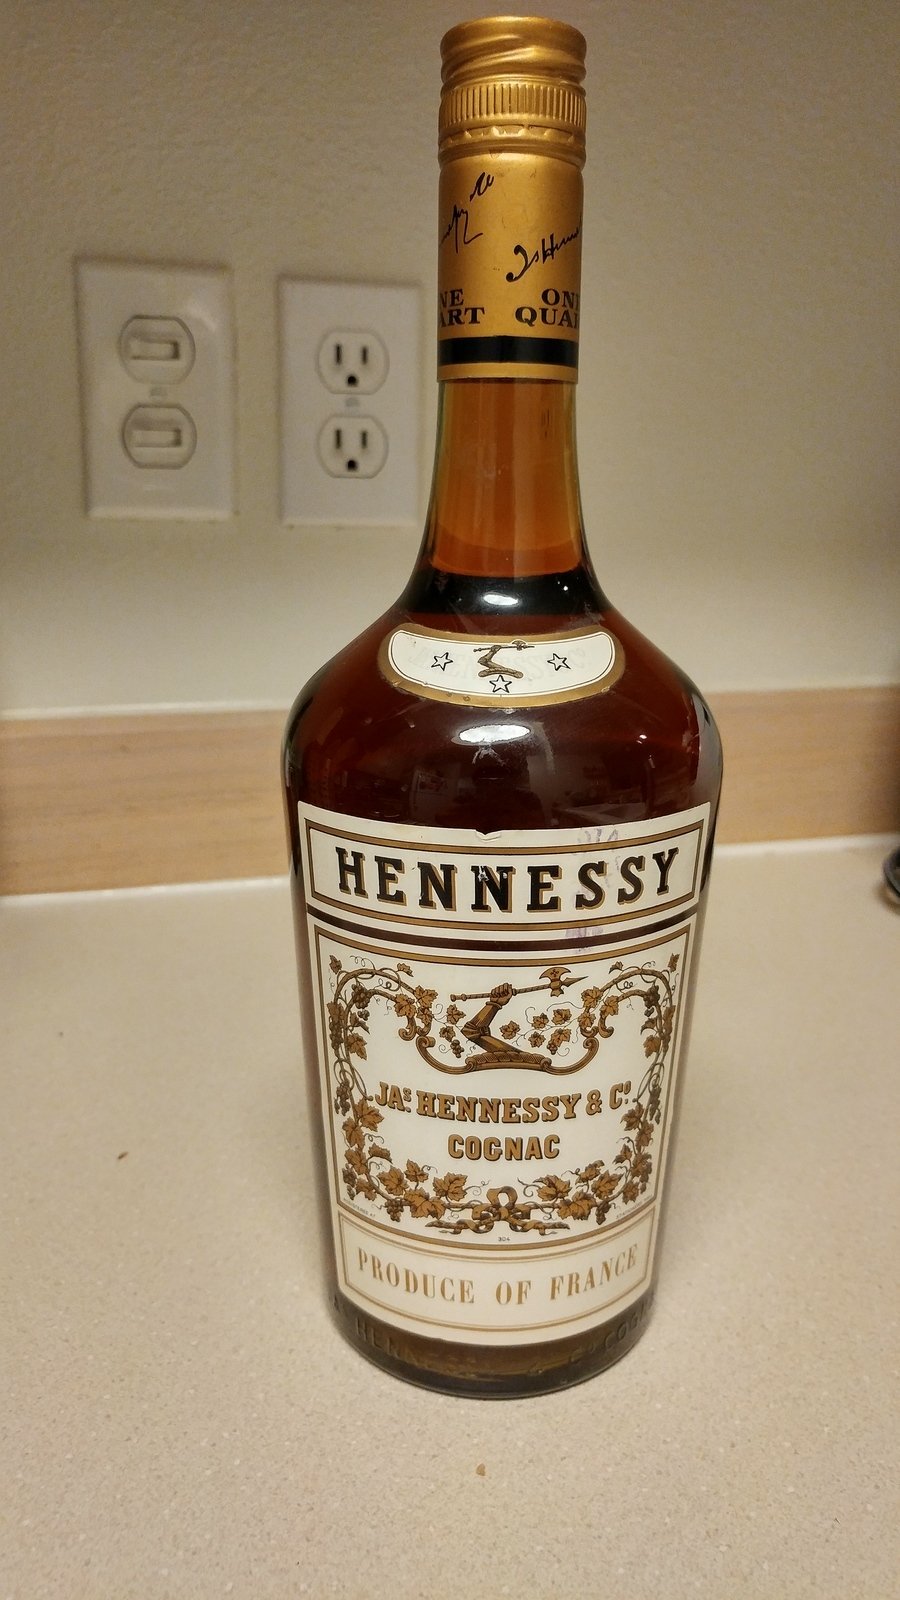 Please Date This Bottle Of Hennessy Cognac.